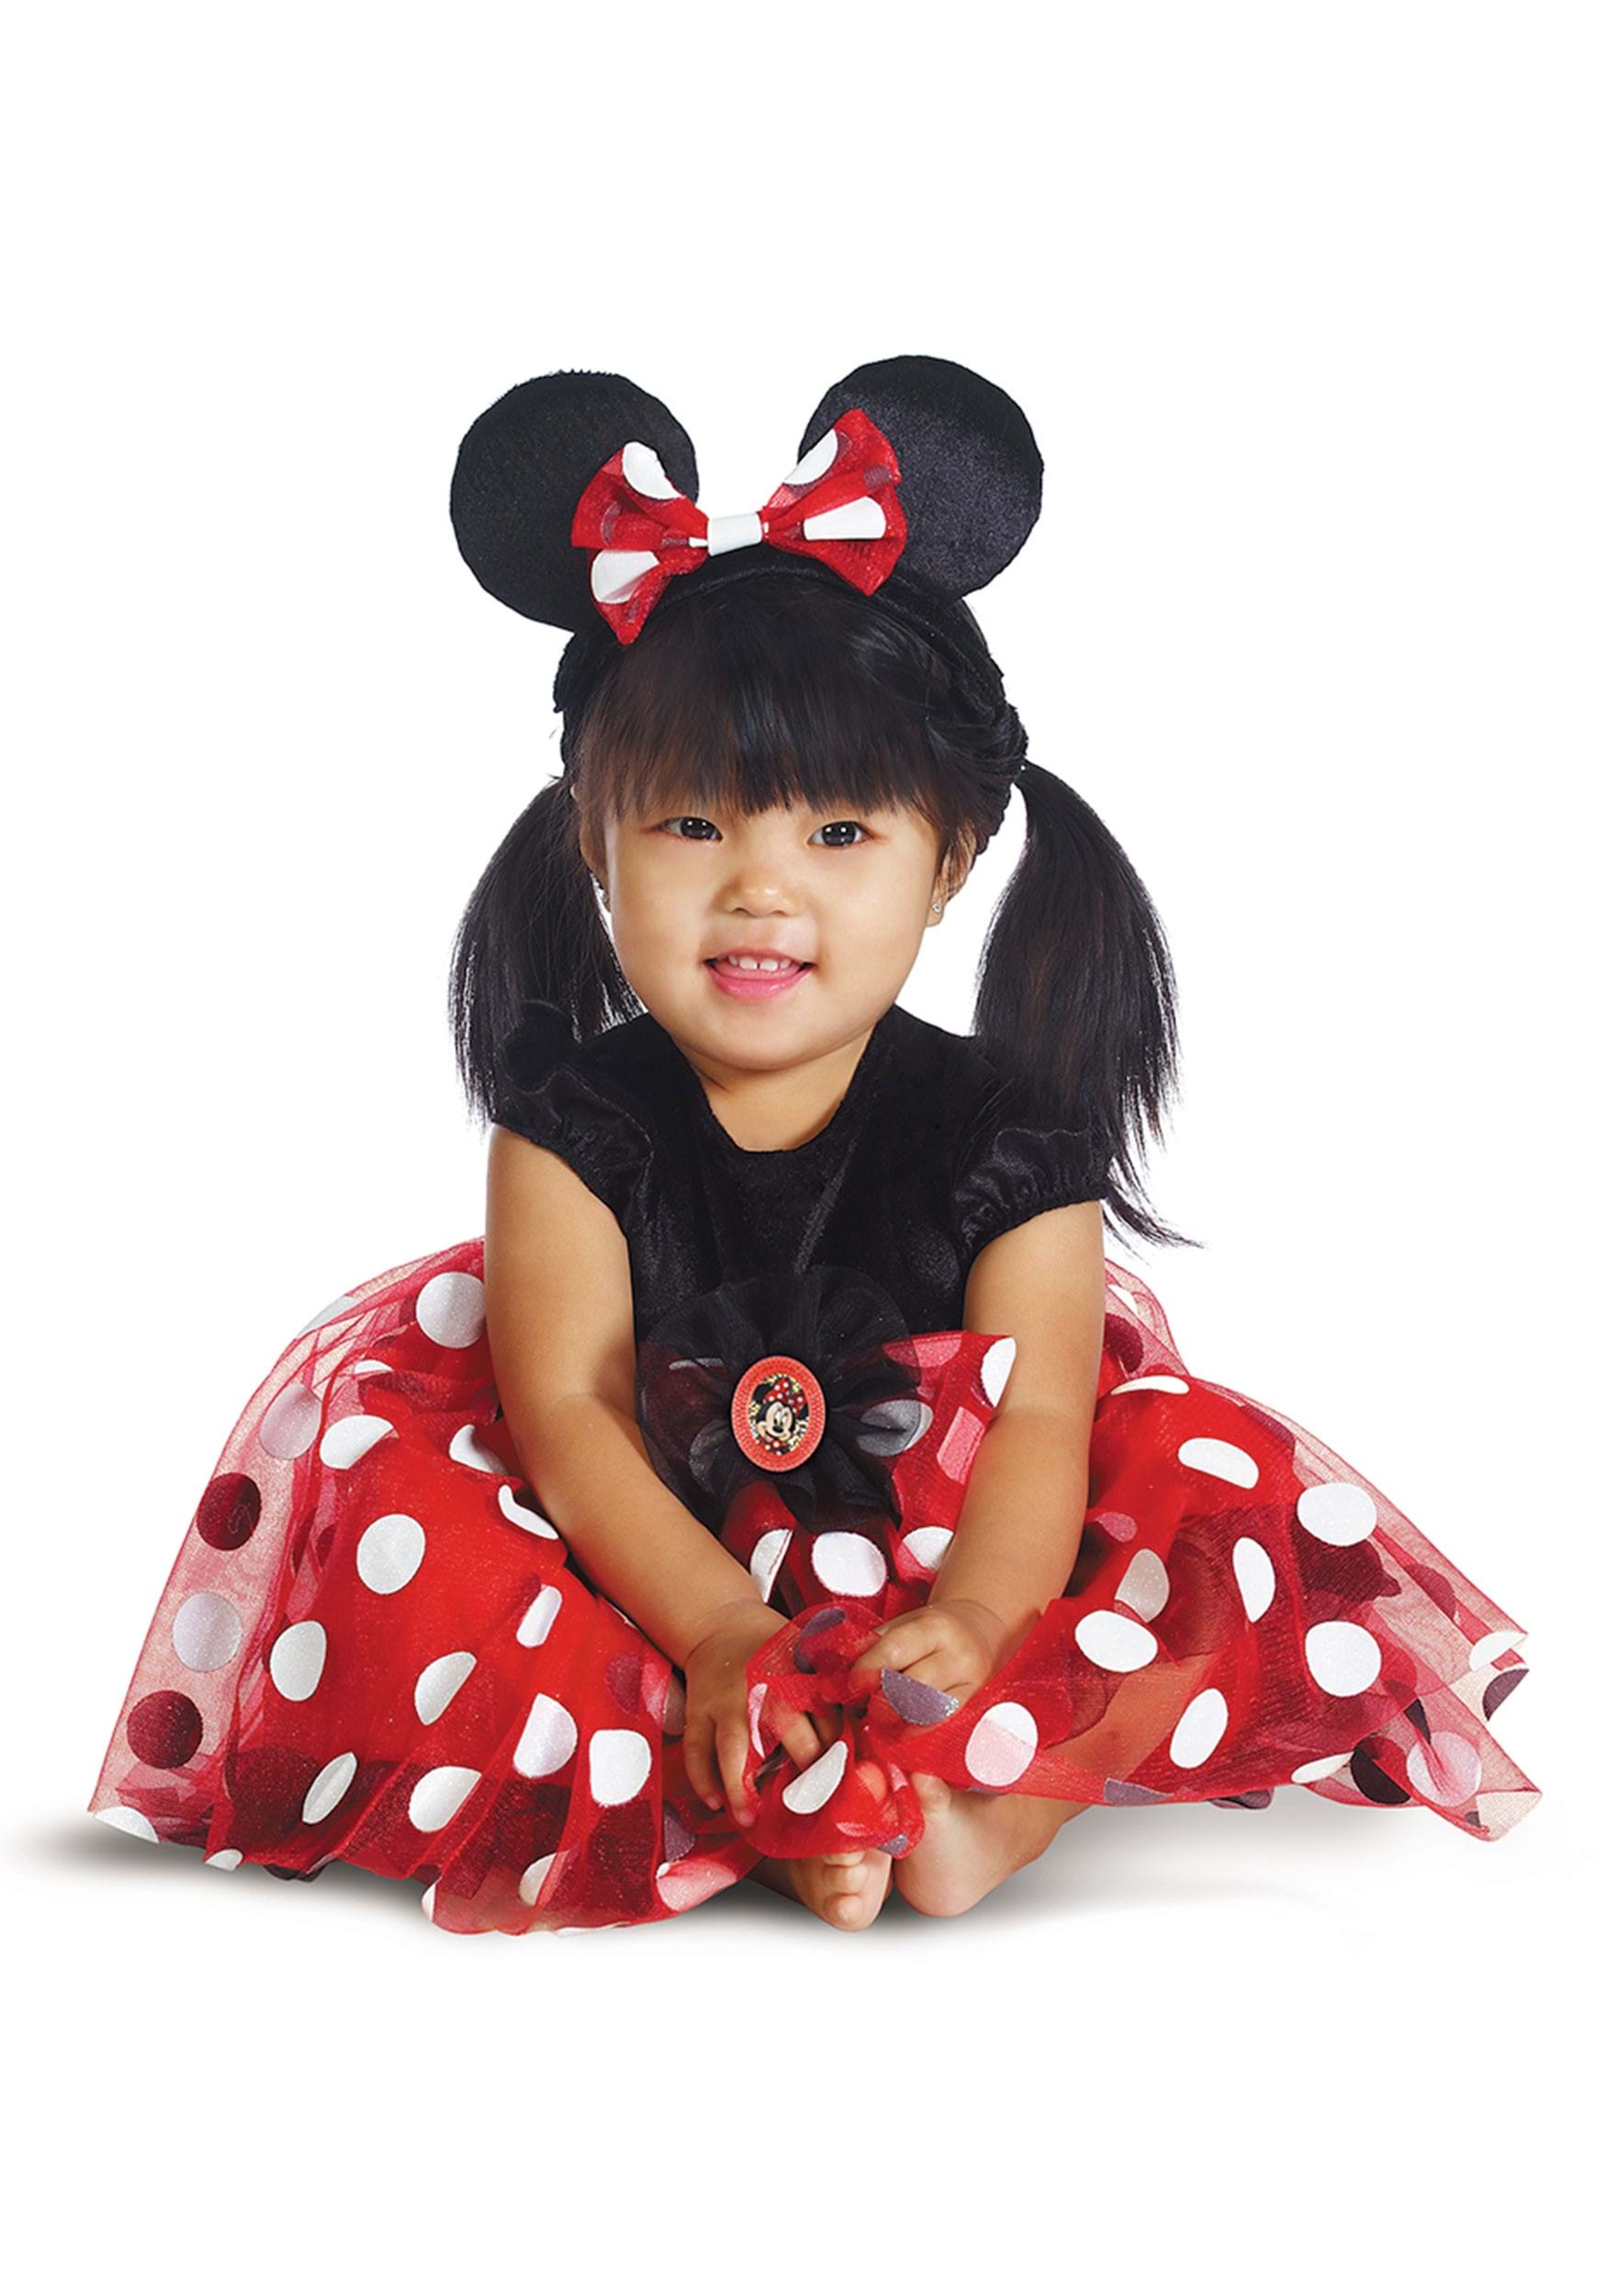 minnie mouse makeup ideas for kids